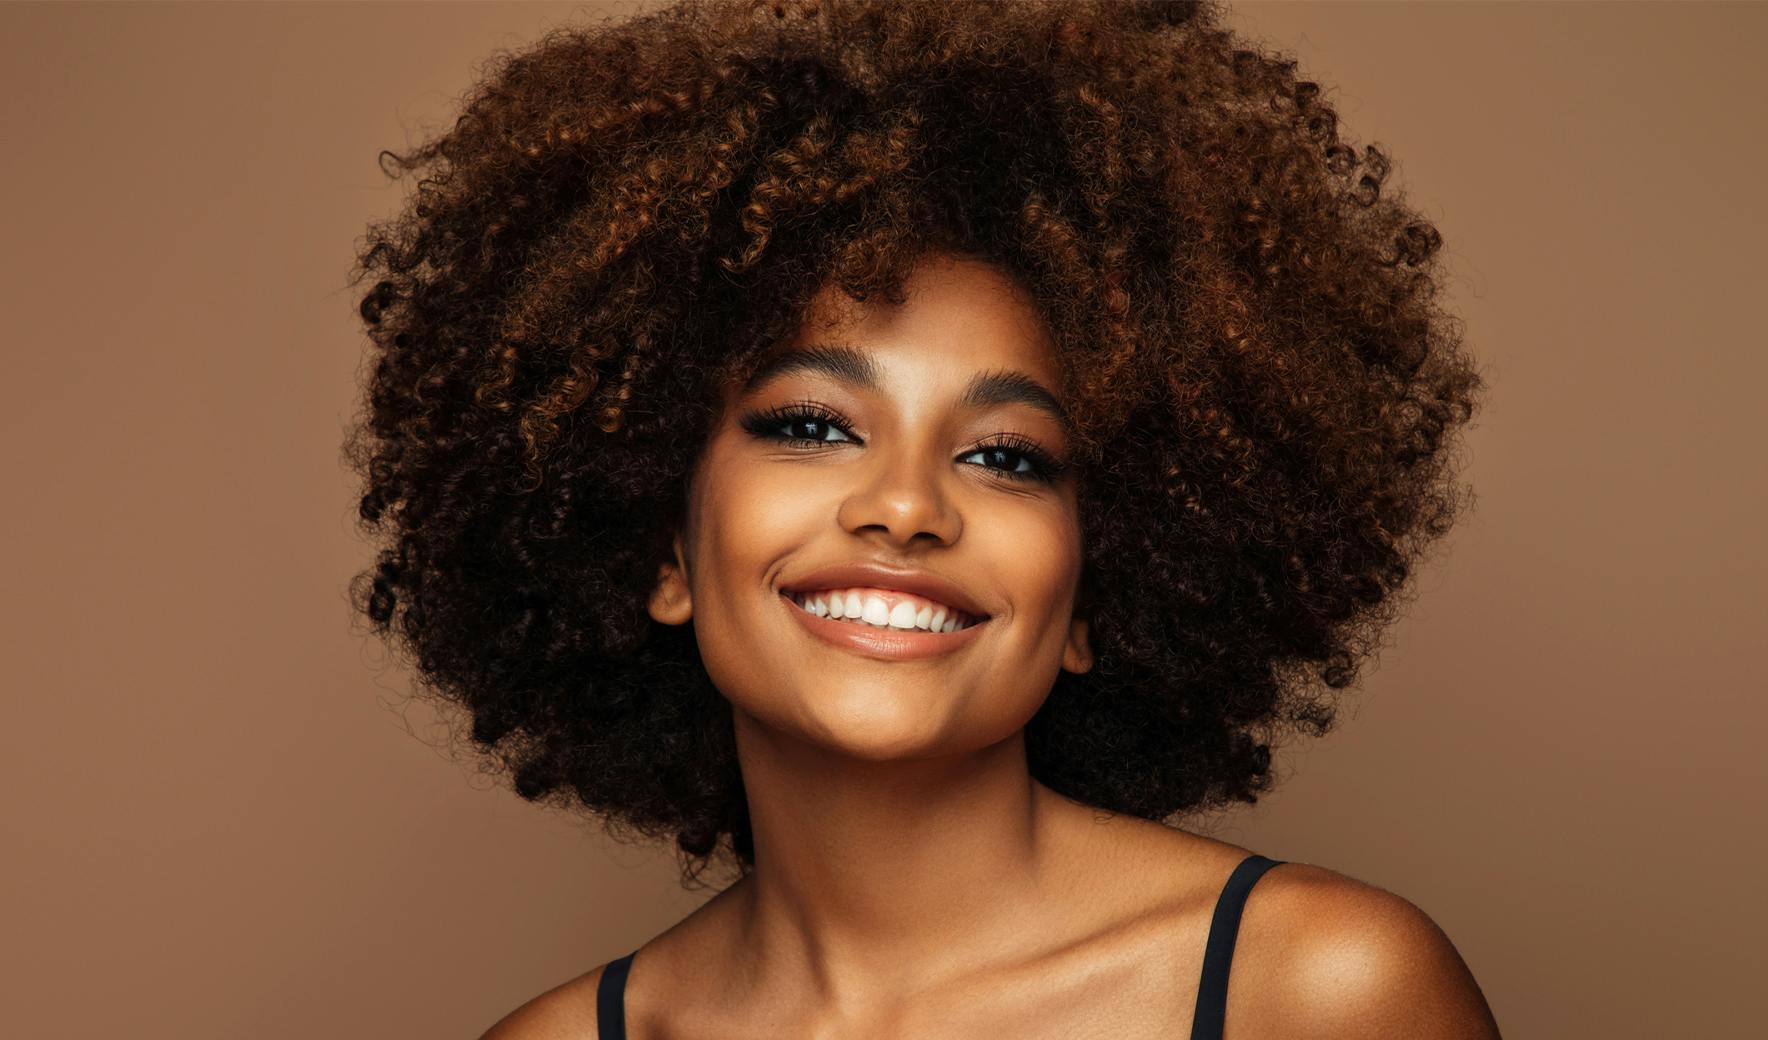 woman with afro hair smiling